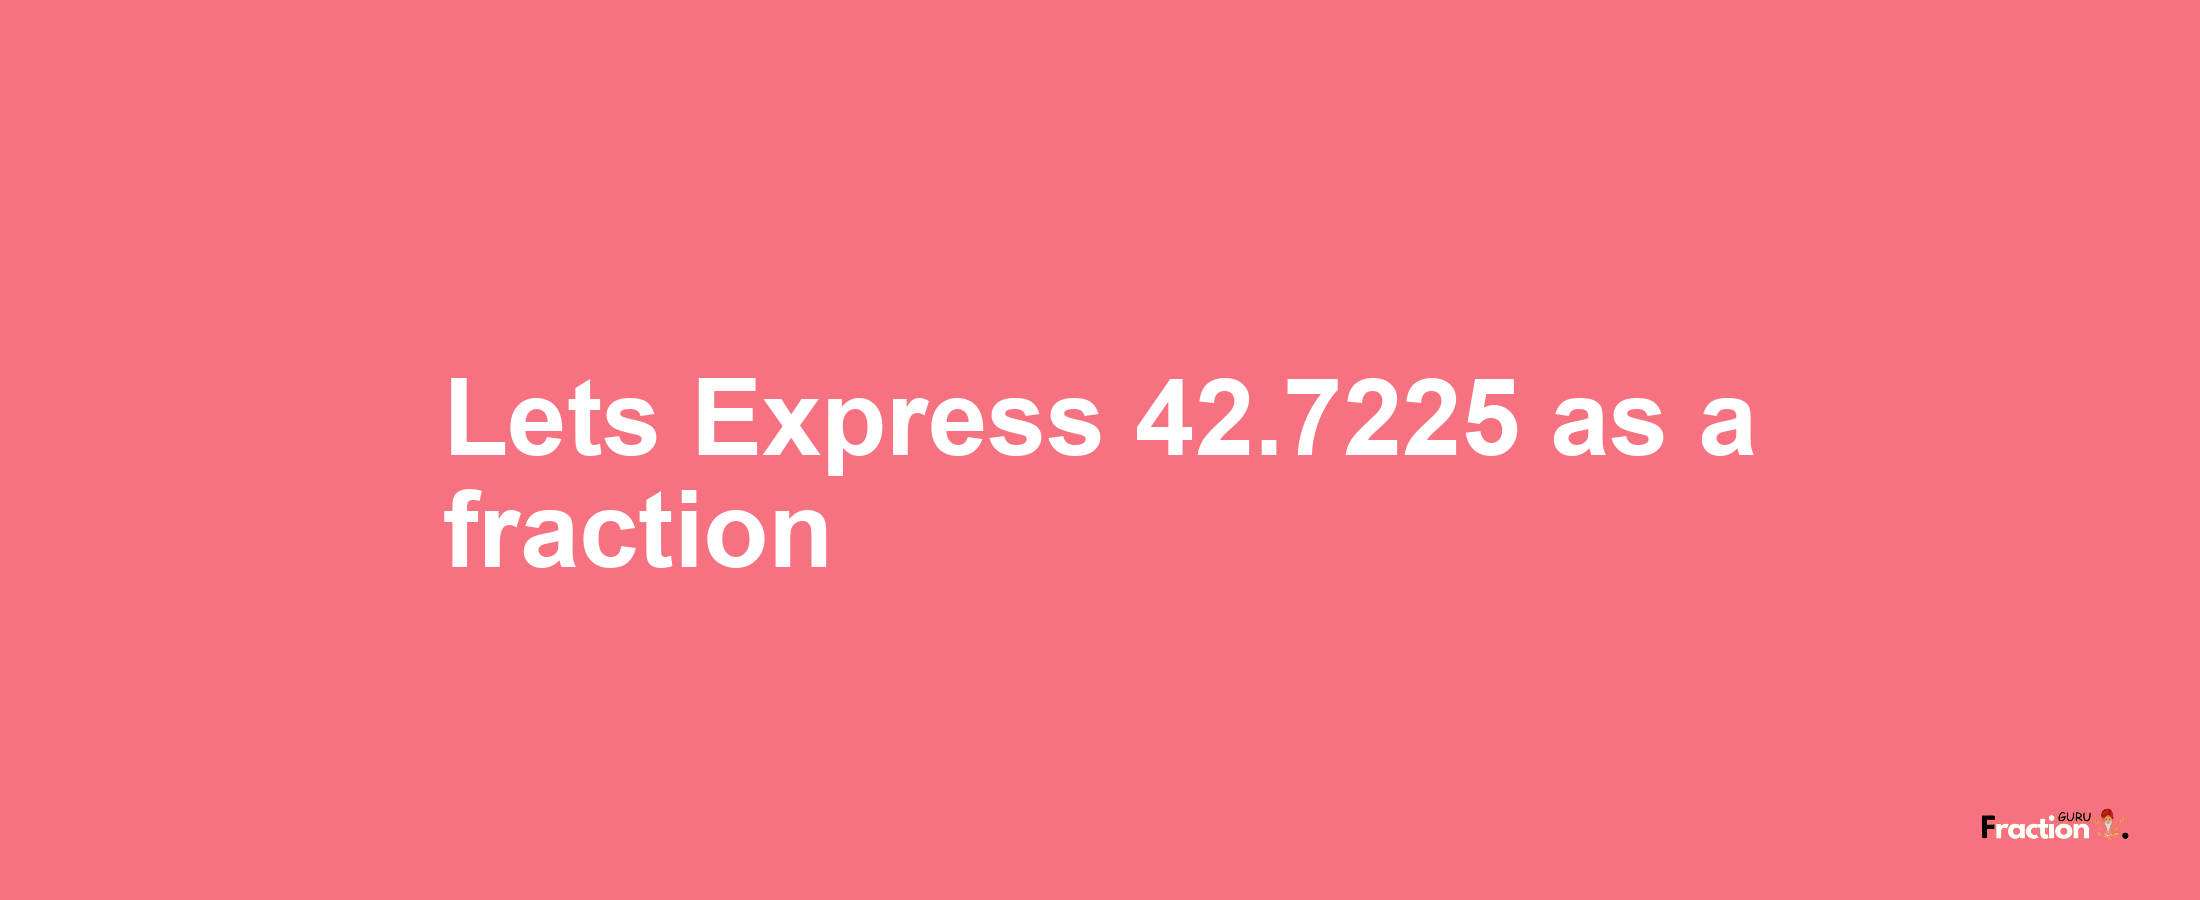 Lets Express 42.7225 as afraction